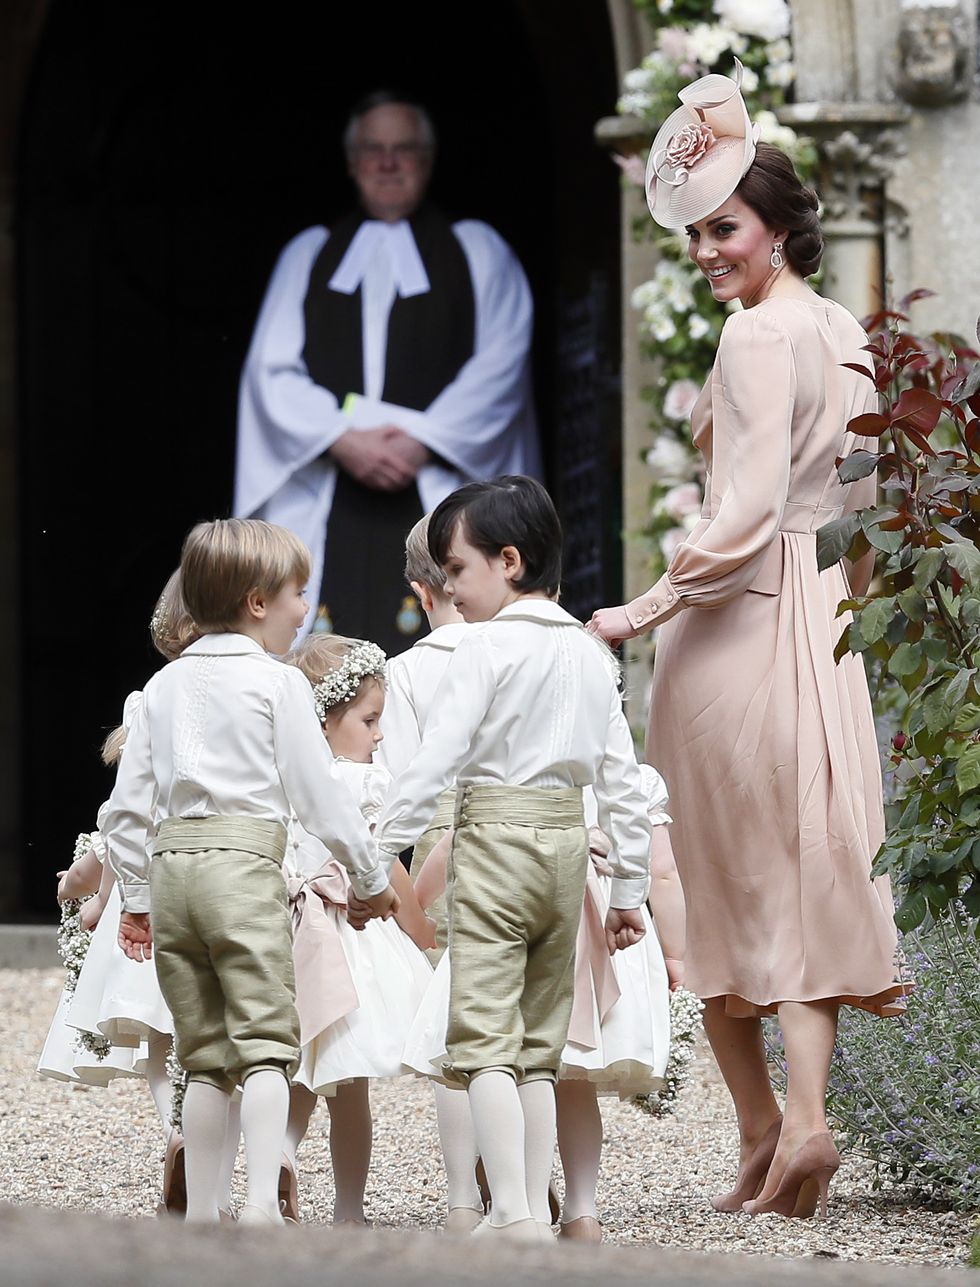 Kate Middleton Stuns in a Pink Alexander McQueen Dress at Pippa's Wedding -  What Princess Kate Wore